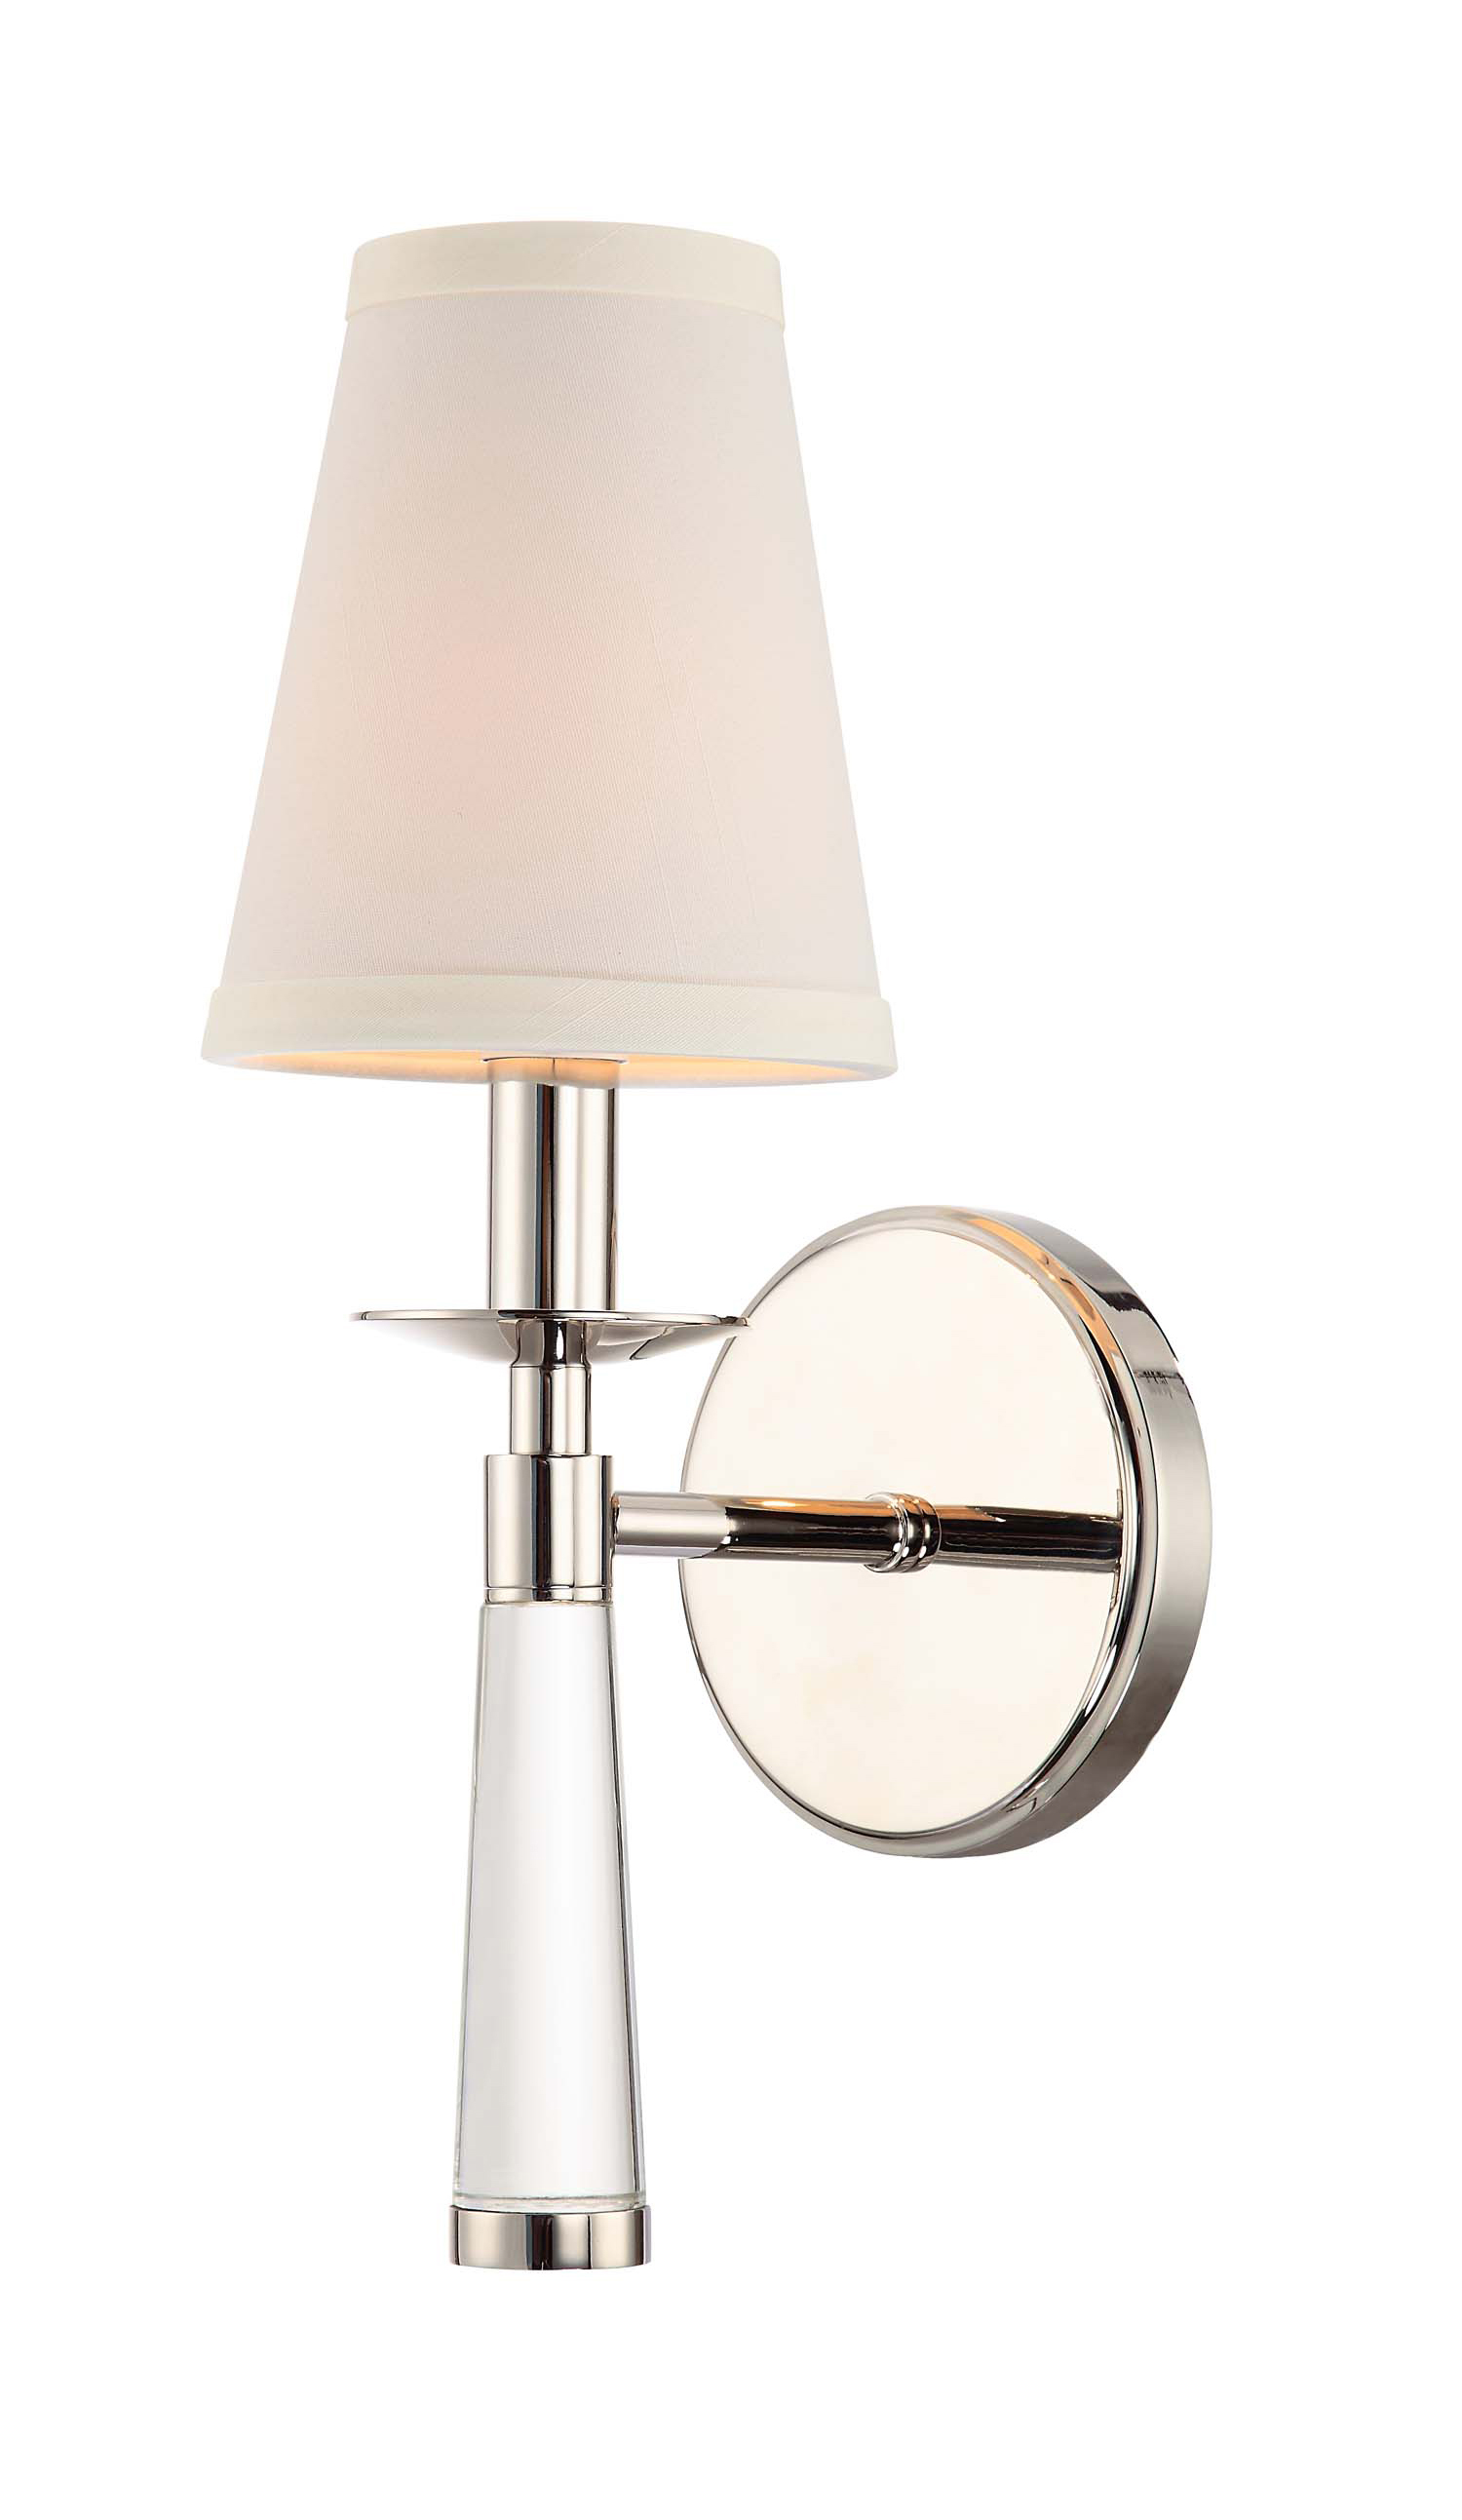 Baxter sconce in silver finish with shade from Crystorama